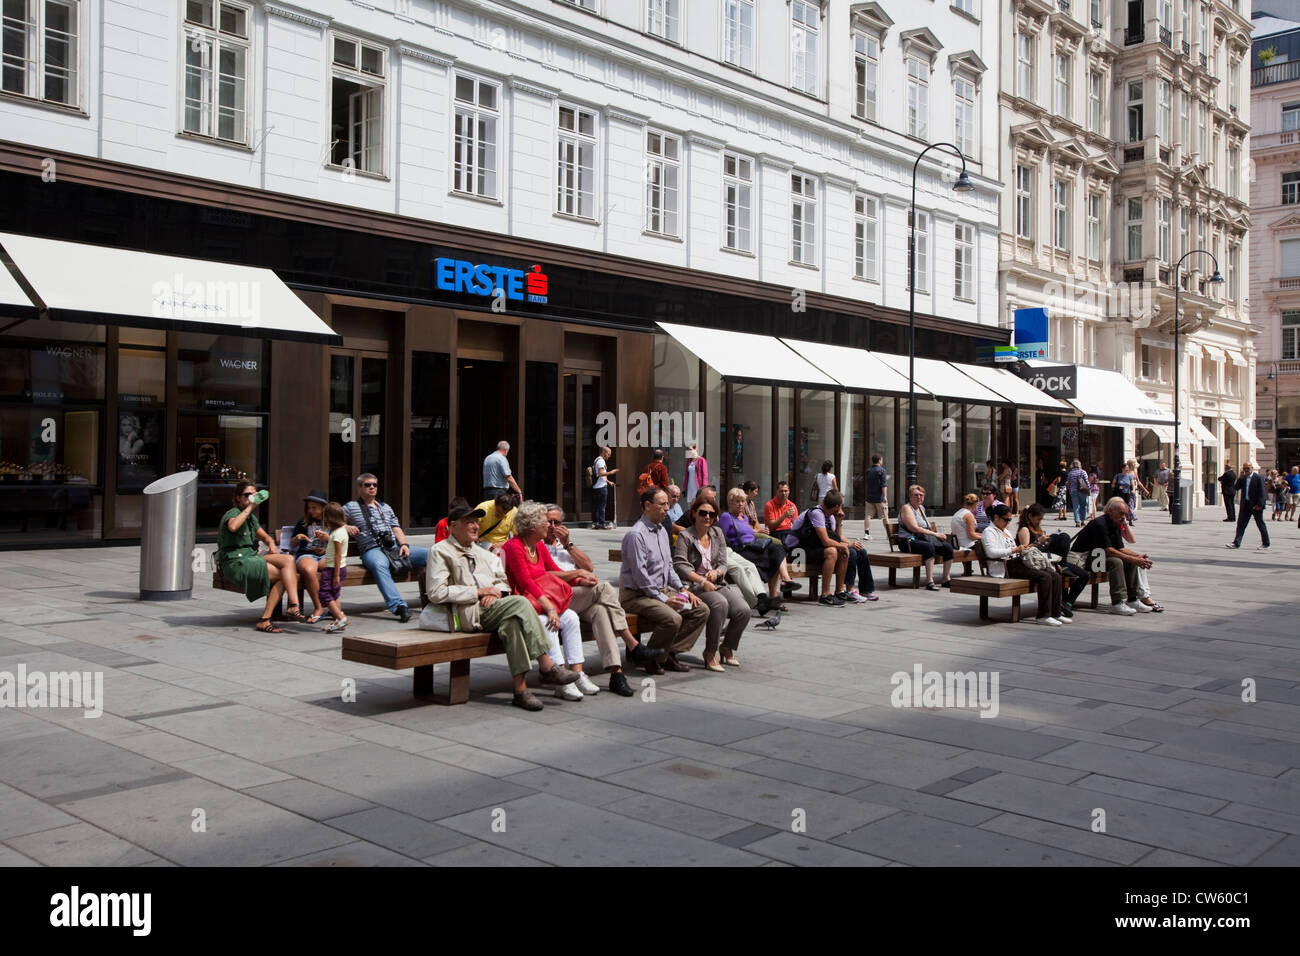 People sitting on a bench in Graben street, Vienna Stock Photo